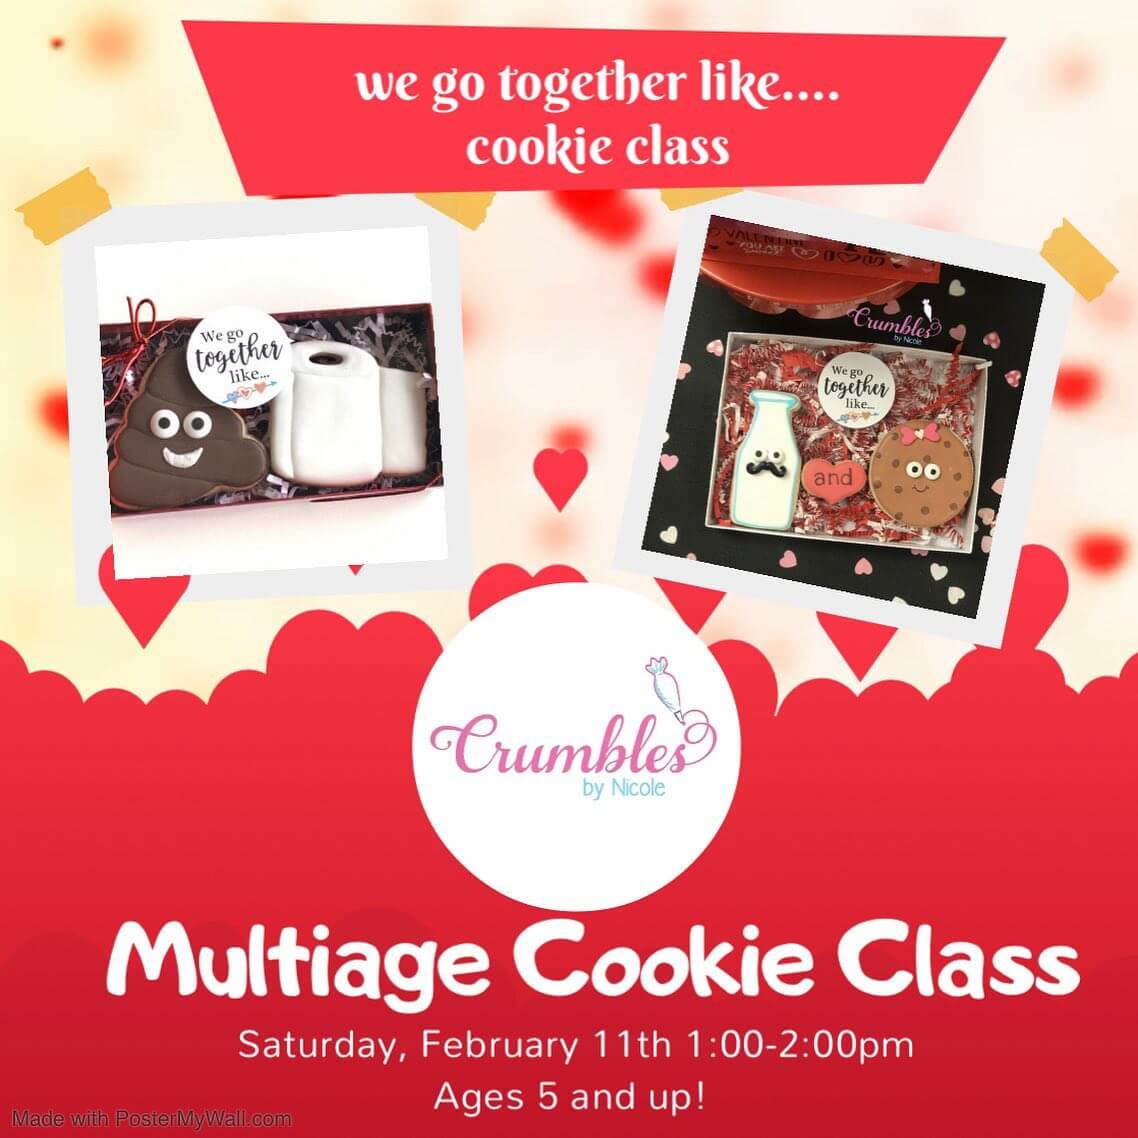 Cookie decorating class at Crumbles flyer